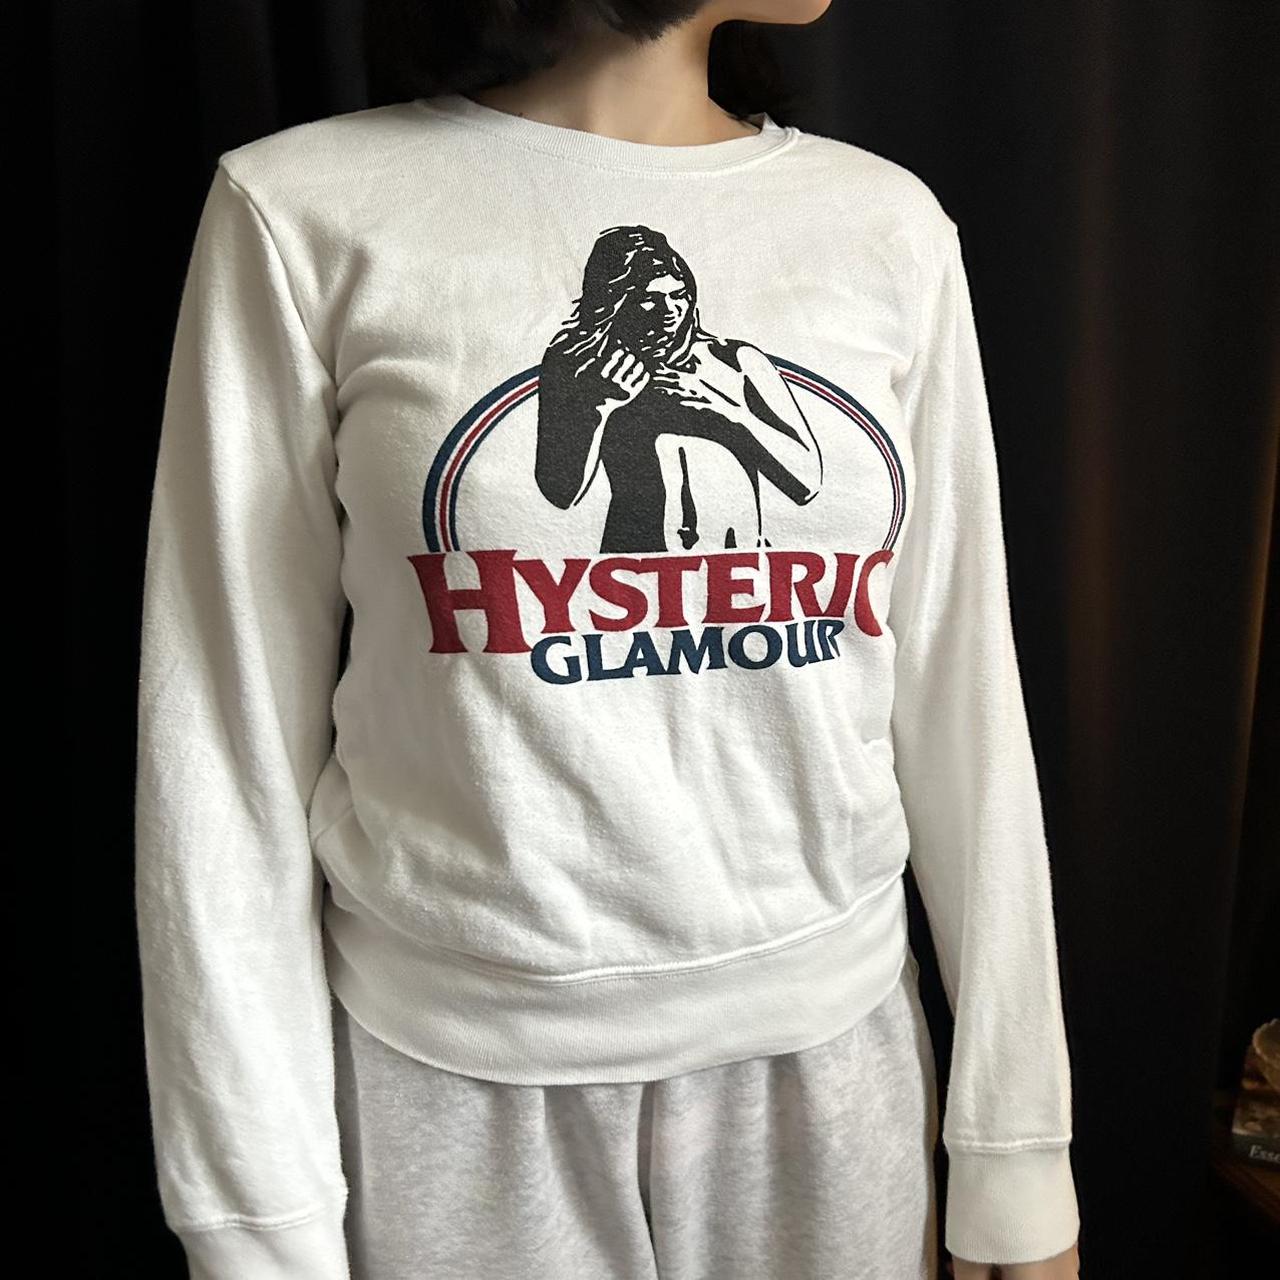 Hysteric Glamour Men's White and Red Sweatshirt (3)